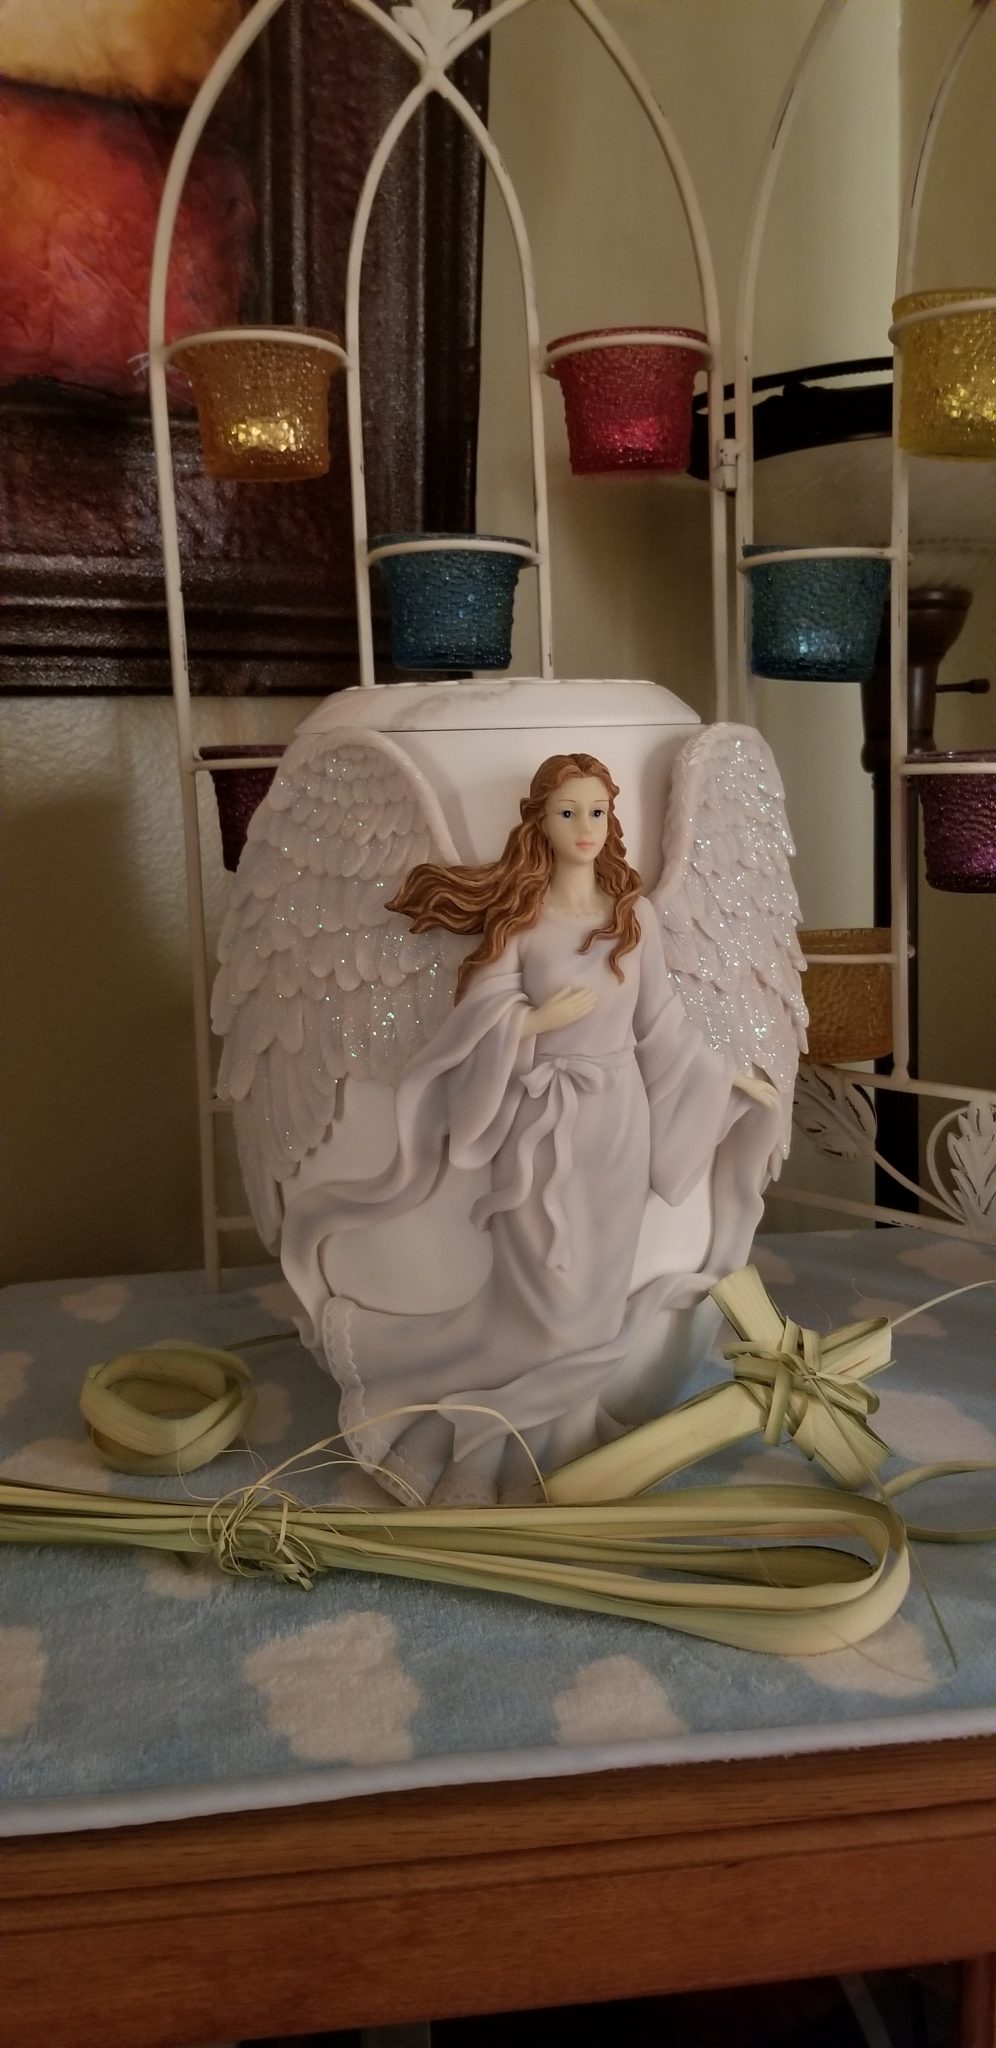 My Sister's urn is a beautiful Angel...I know she would love this..her children picked it out